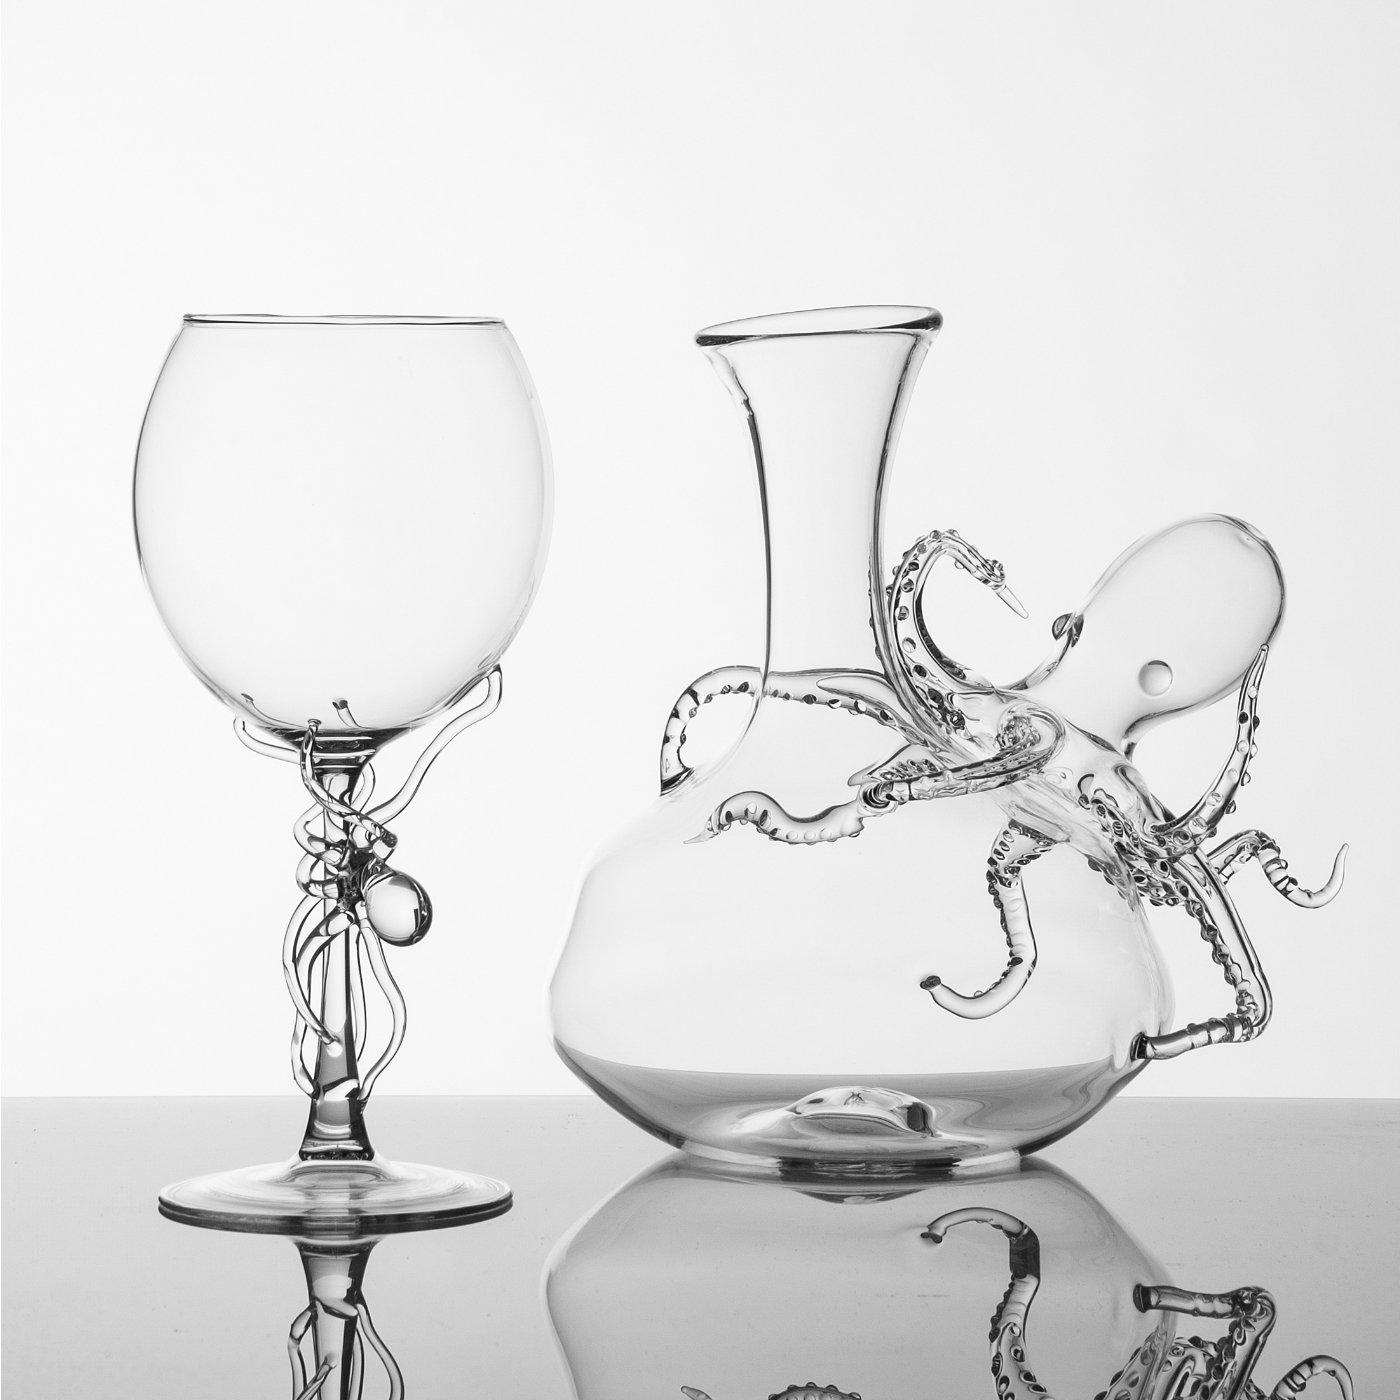 The enveloping elegance of the Polpo Collection may make you believe that the animal is really wrapping the decanter or climbing up the stem of the glass. Details are recreated with great precision in homage to these extraordinary creatures that